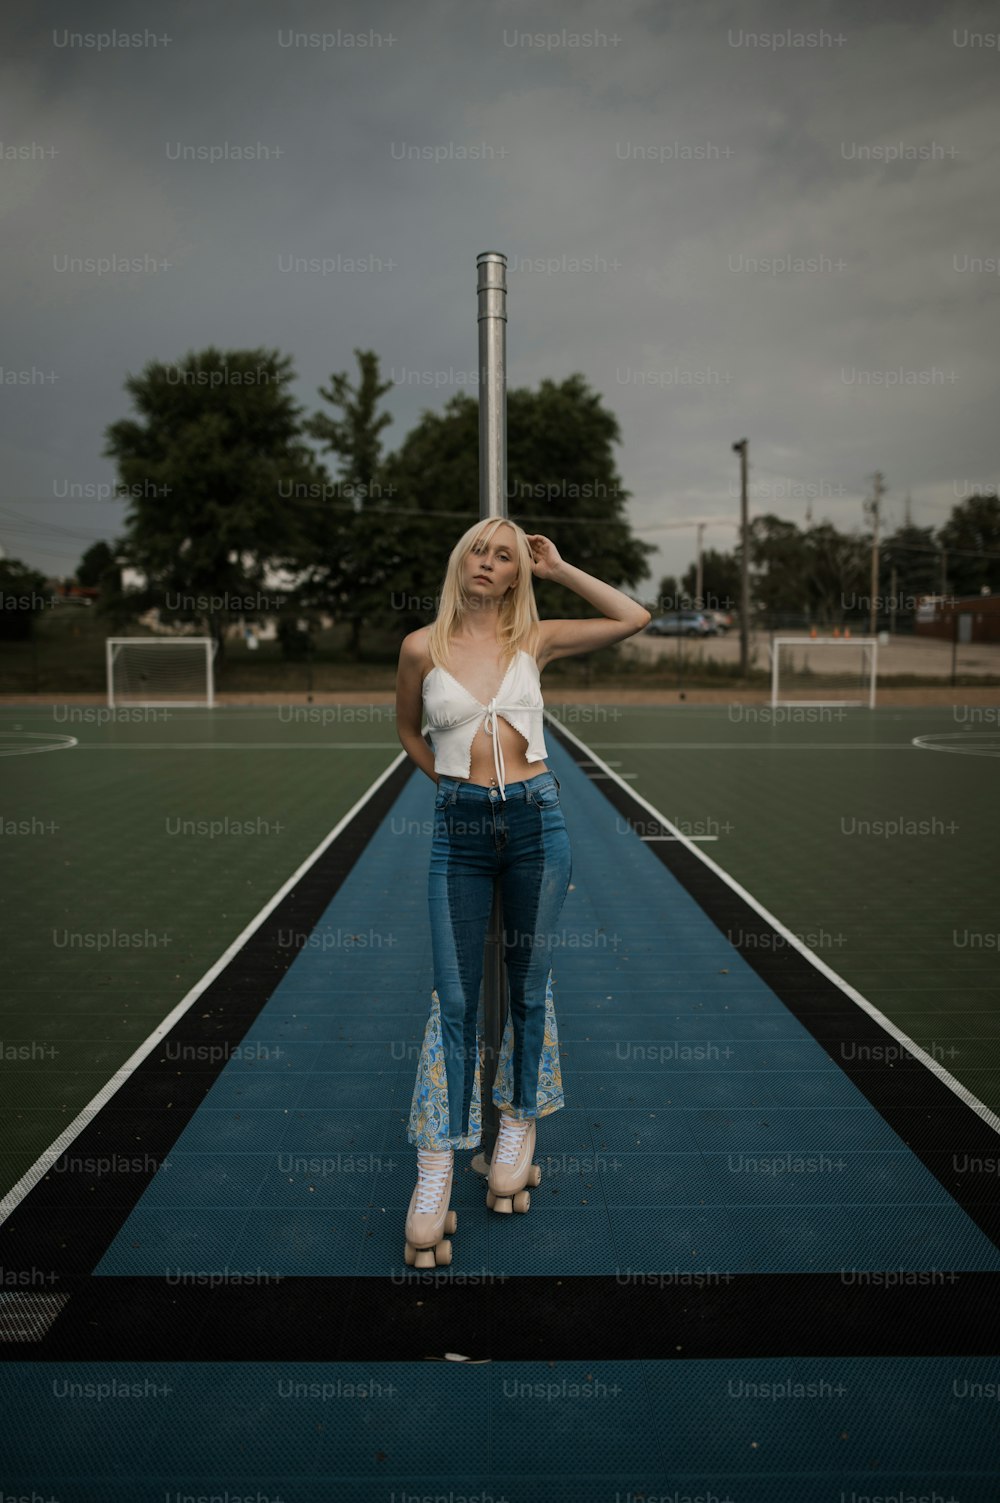 a woman is standing on a tennis court